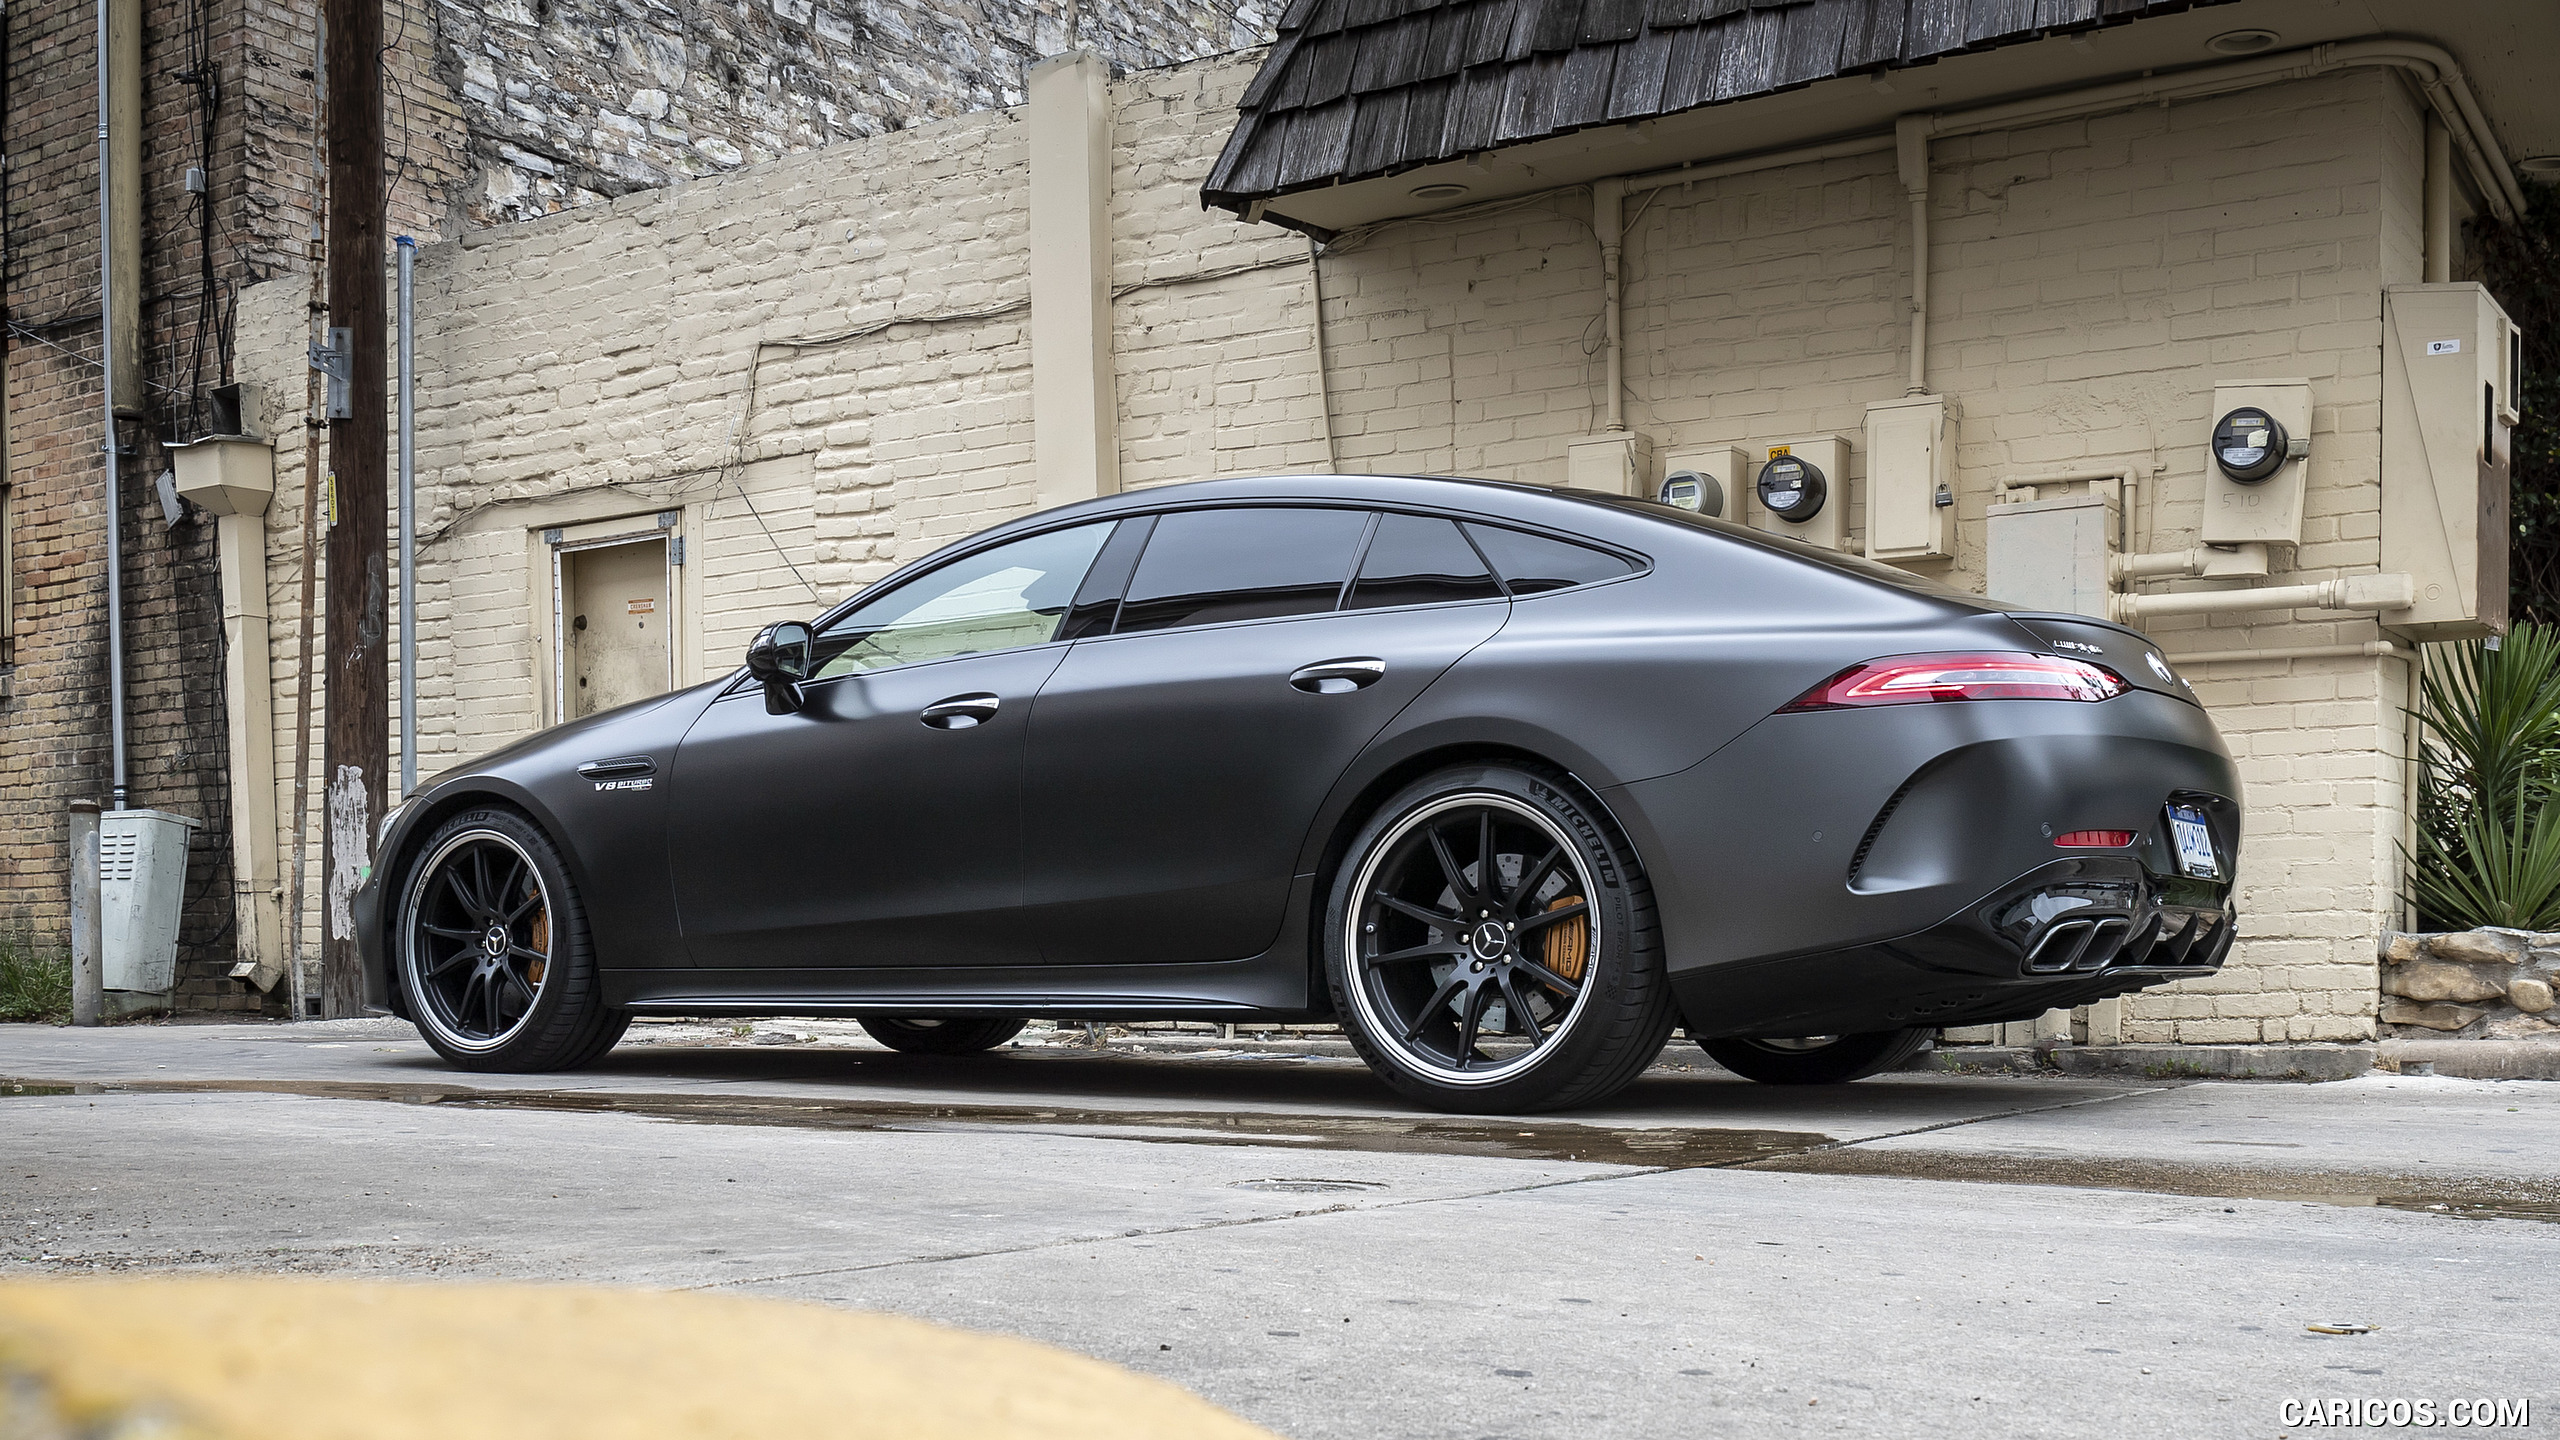 2019 Mercedes-AMG GT 63 S 4MATIC+ 4-Door Coupe - Side, #196 of 427